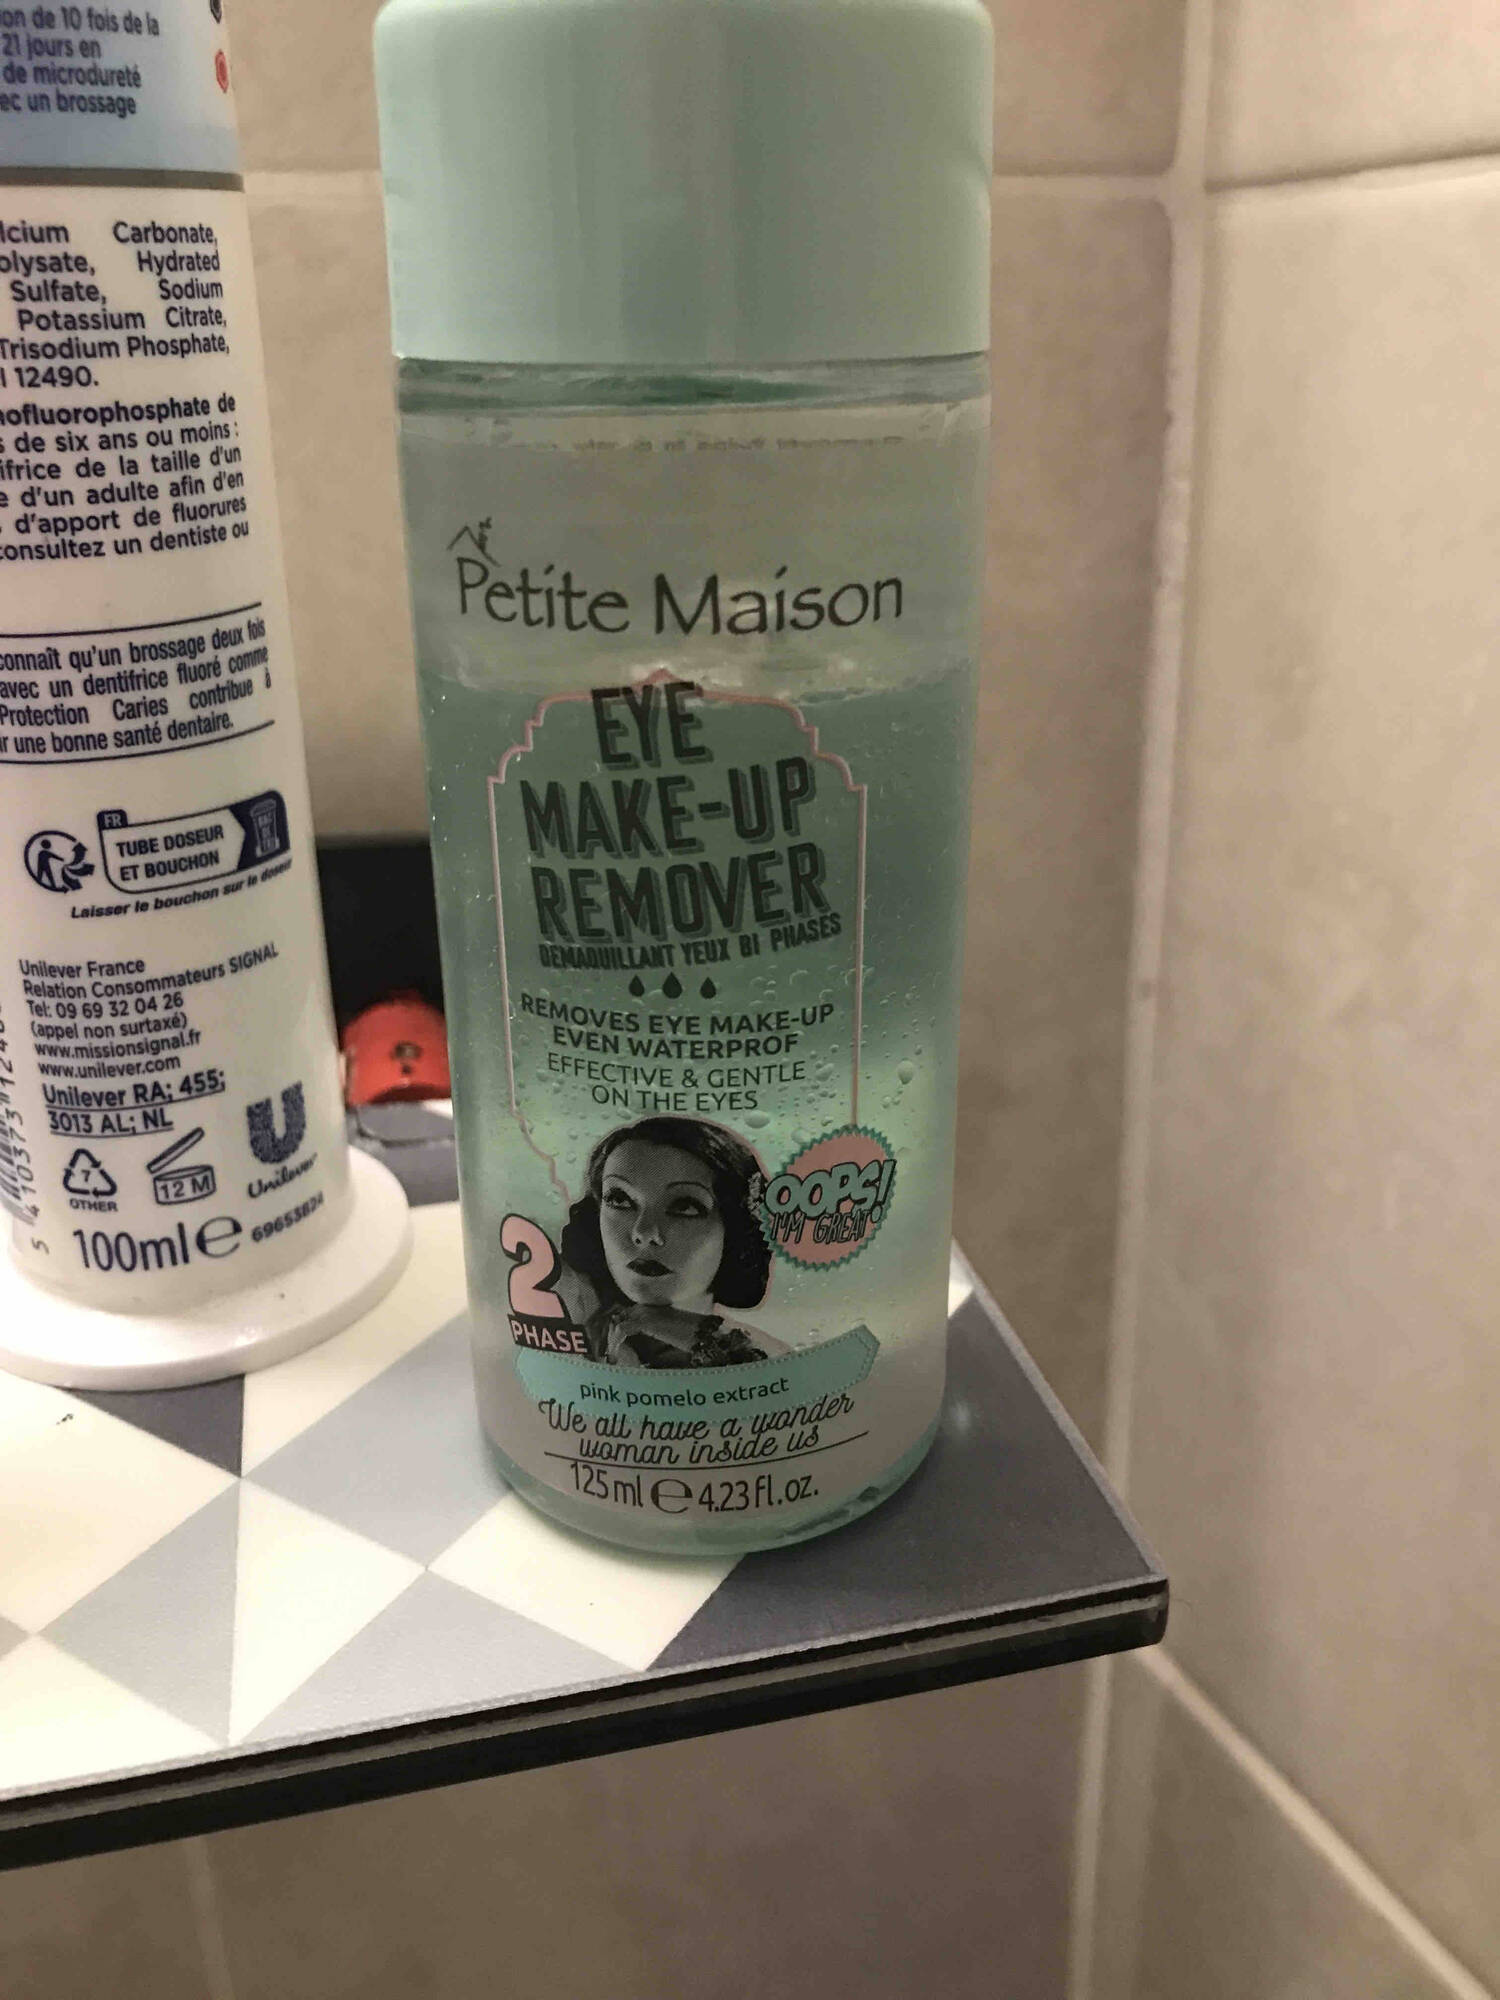 PETITE MAISON - Eye make-up remover - Demaquillant yeux bi phases